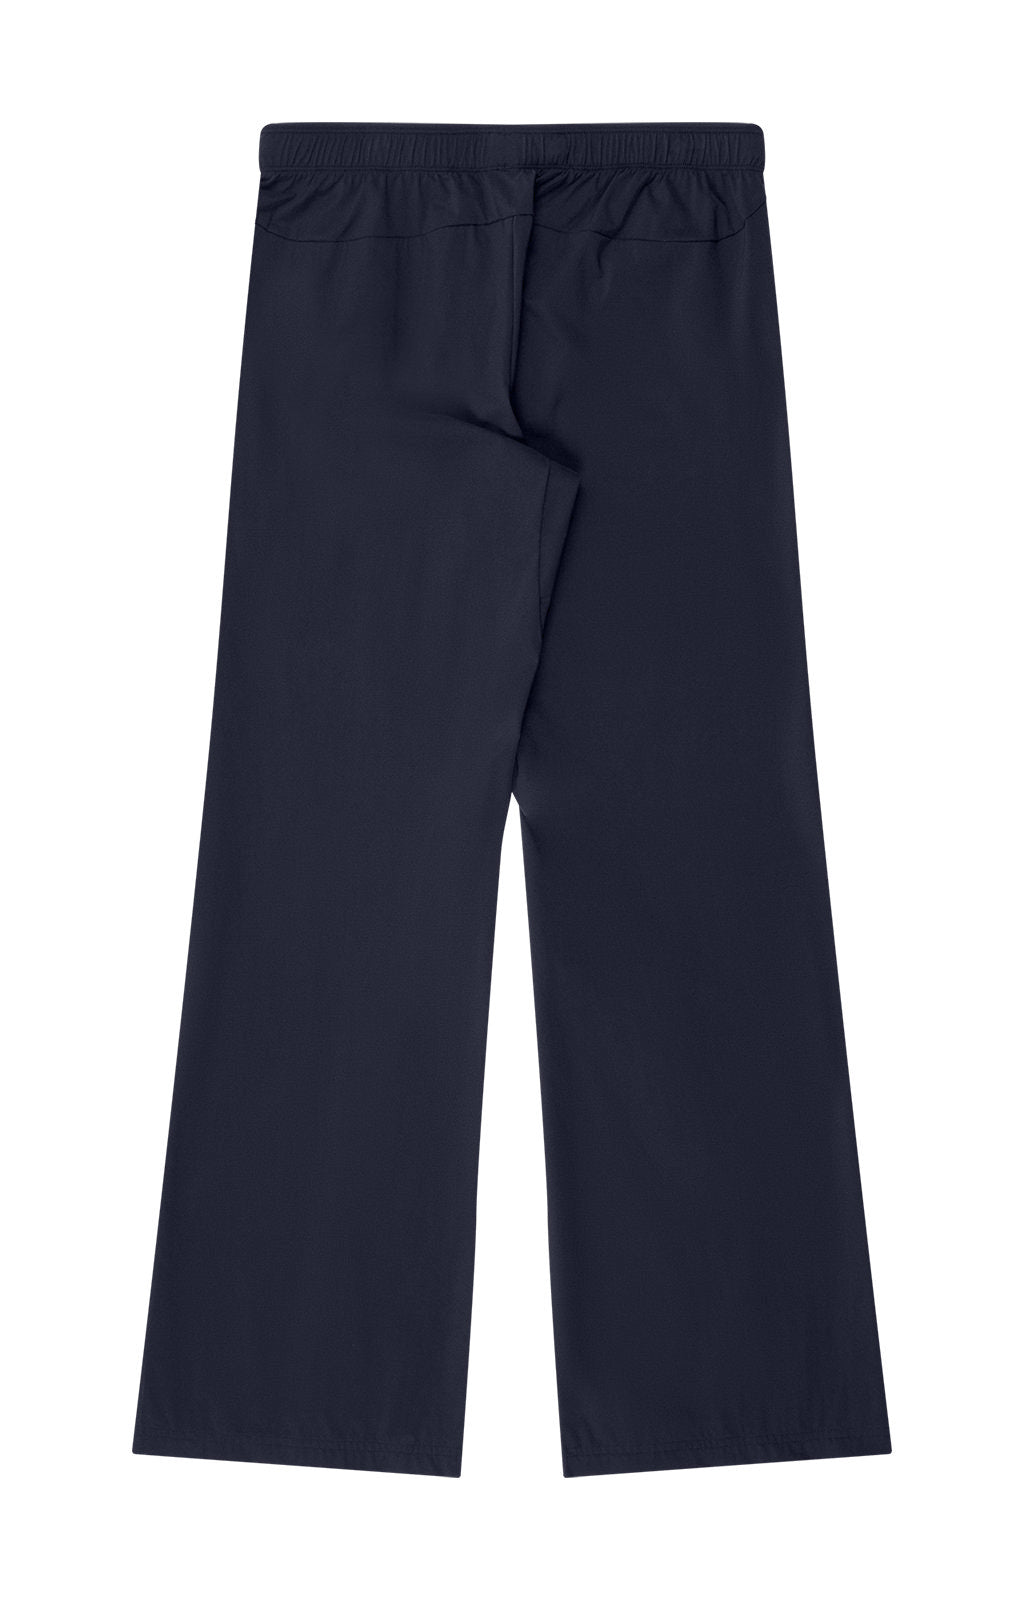 Imagine - Insanely Comfy Long-Haul Flight Pants in Navy